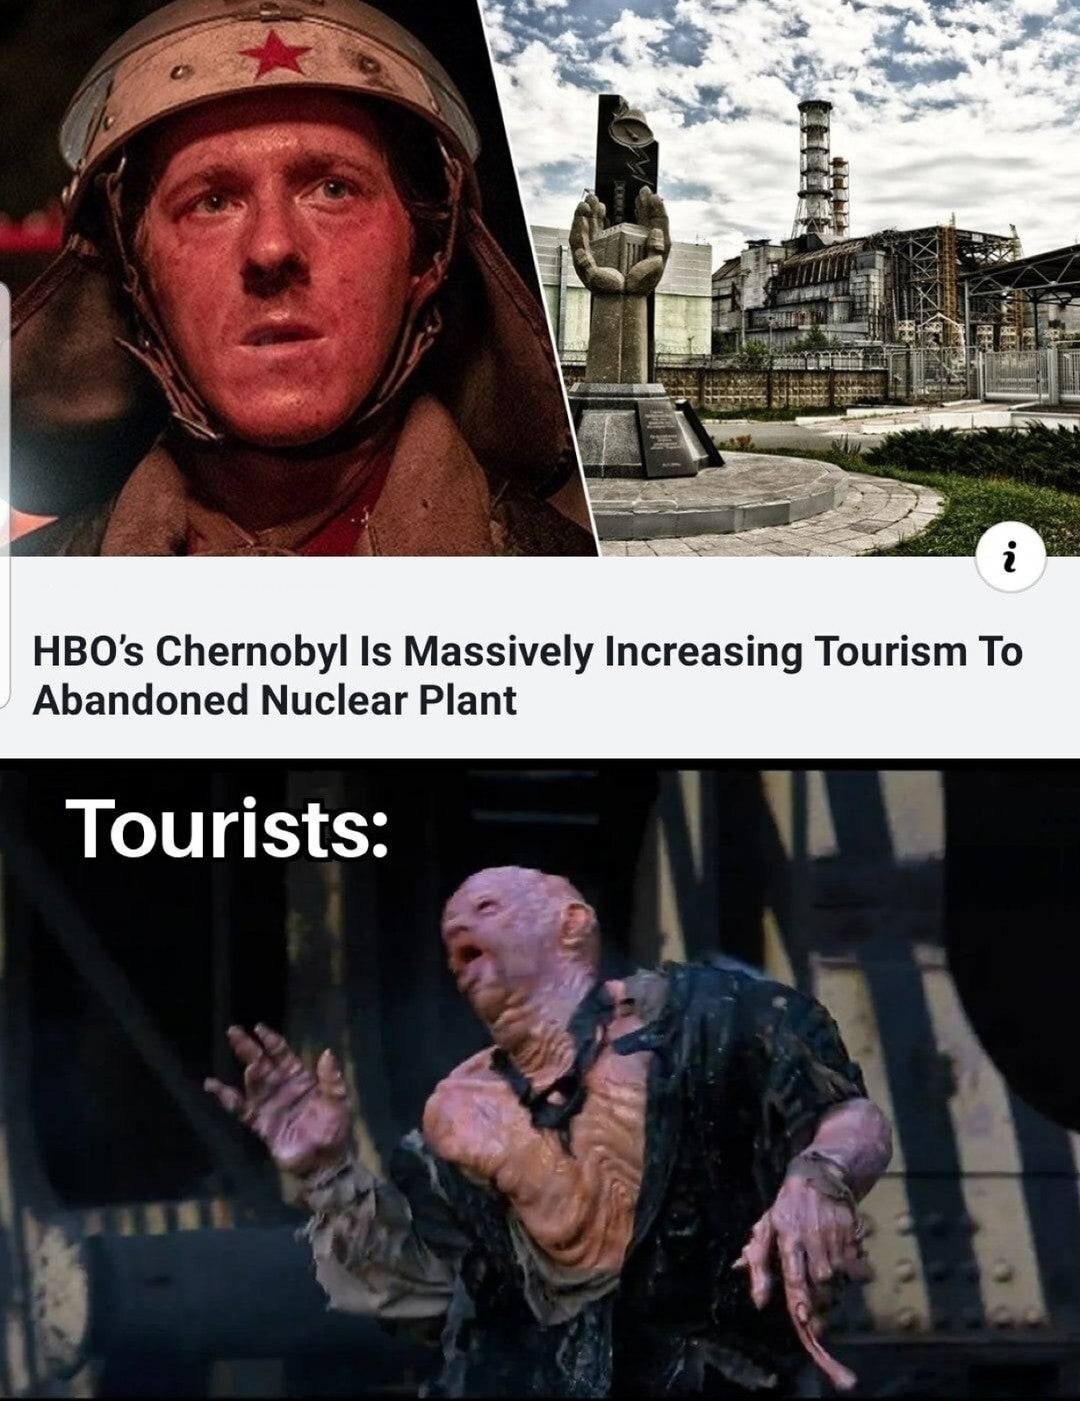 chernobyl nuclear power plant, reactor #4 - Hbo's Chernobyl Is Massively Increasing Tourism To Abandoned Nuclear Plant Tourists